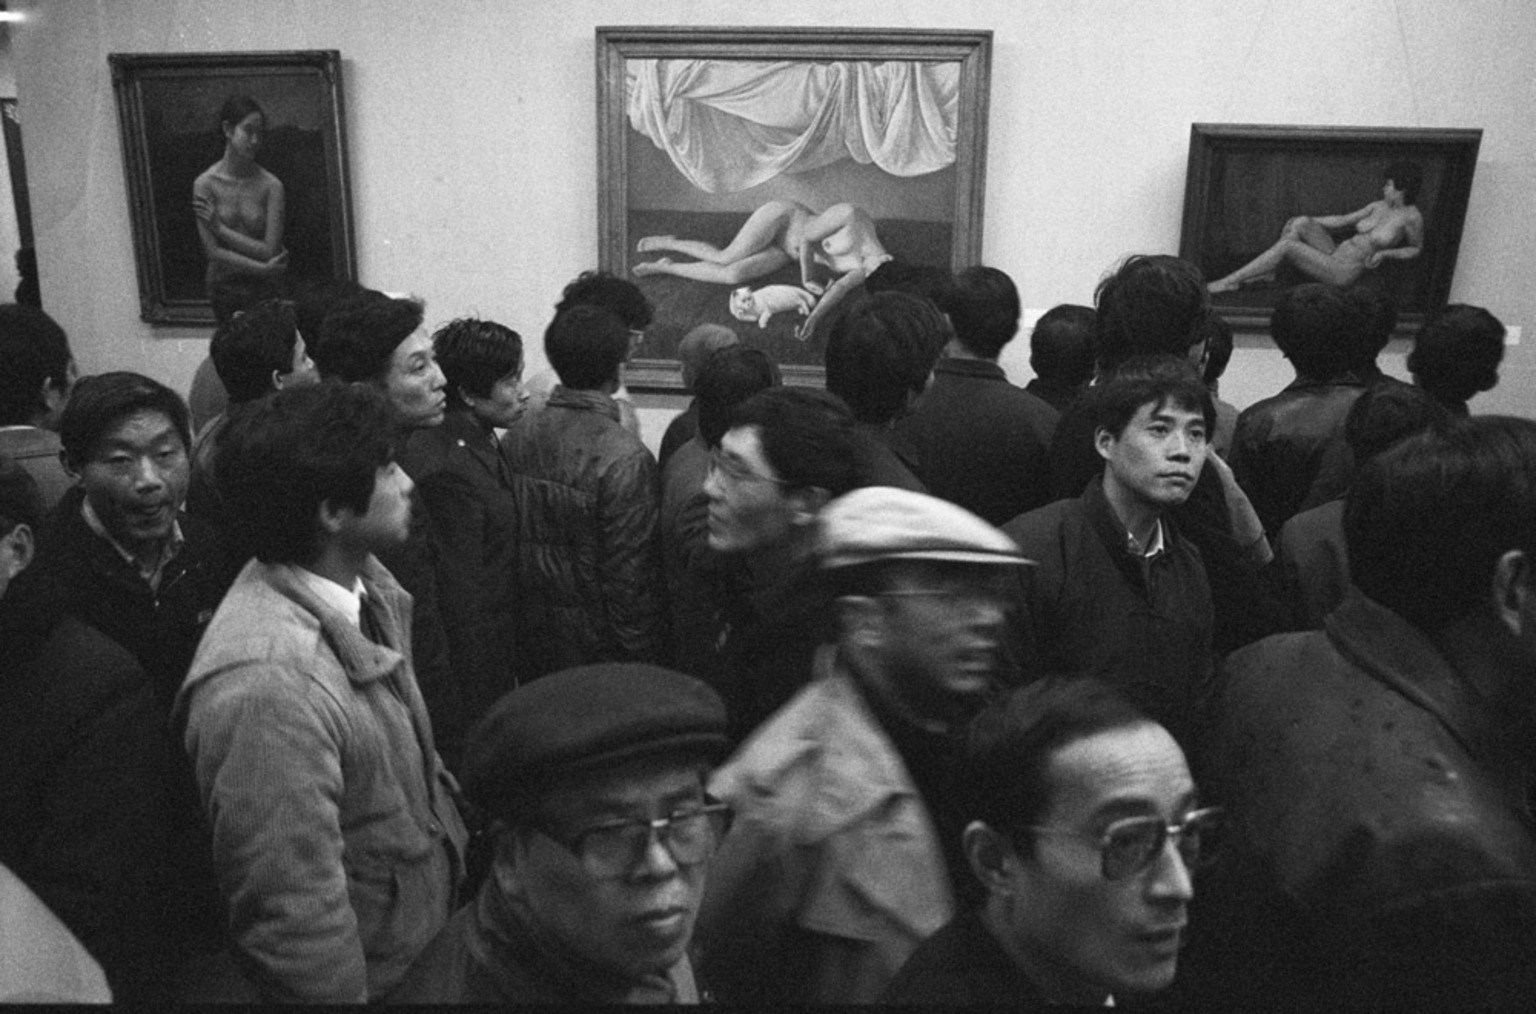 First Oil Painting Nude Exhibition, Shanghai Art Museum, 1988. 
photo by Gong Jianhua
image courtesy of Biljana Ciric Archive
